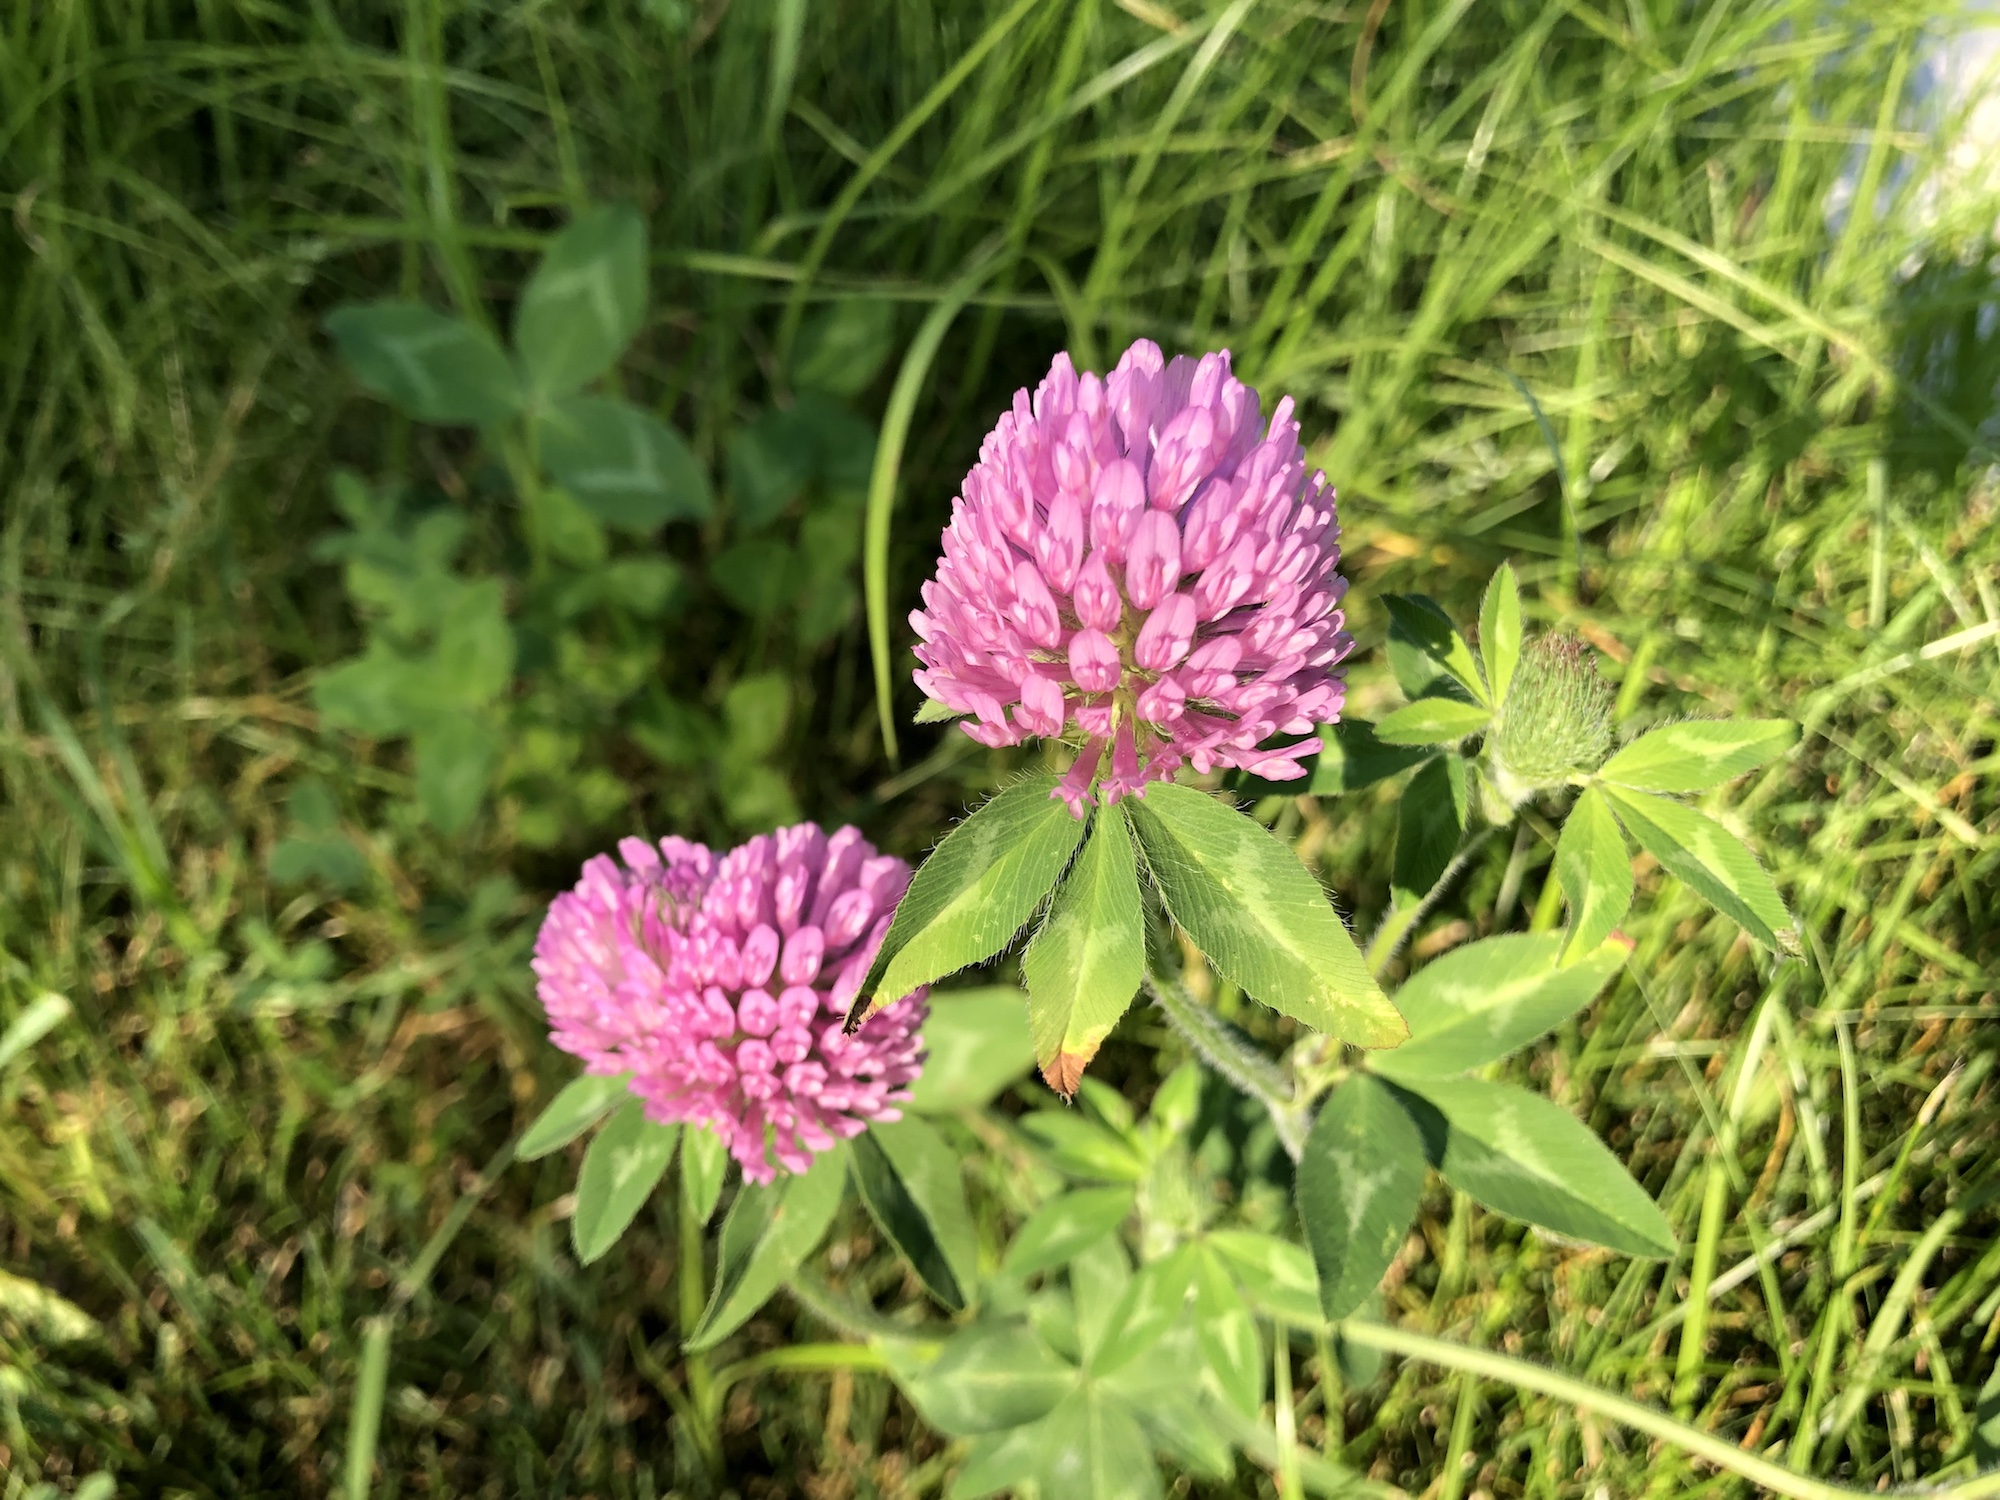 Red Clover around retaining pond at the corner of Manitou Way and Nakoma Road in Madison, Wisconsin on July 27, 2019.